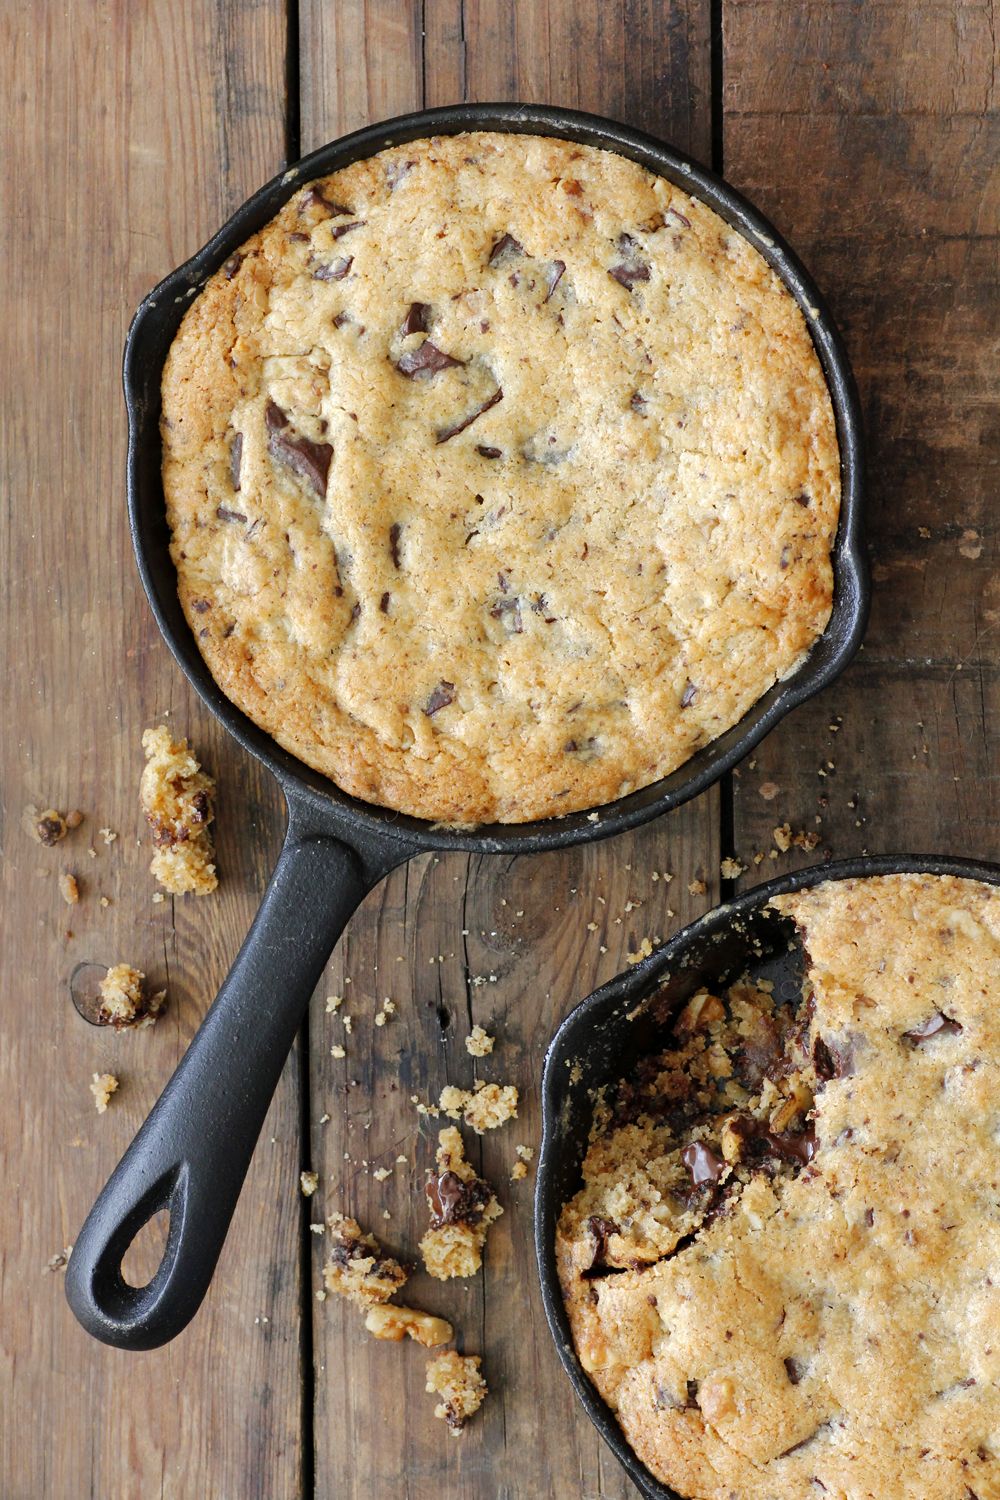 Giant Chocolate Chip Cookie in a Pan with Peanut Butter and Walnuts